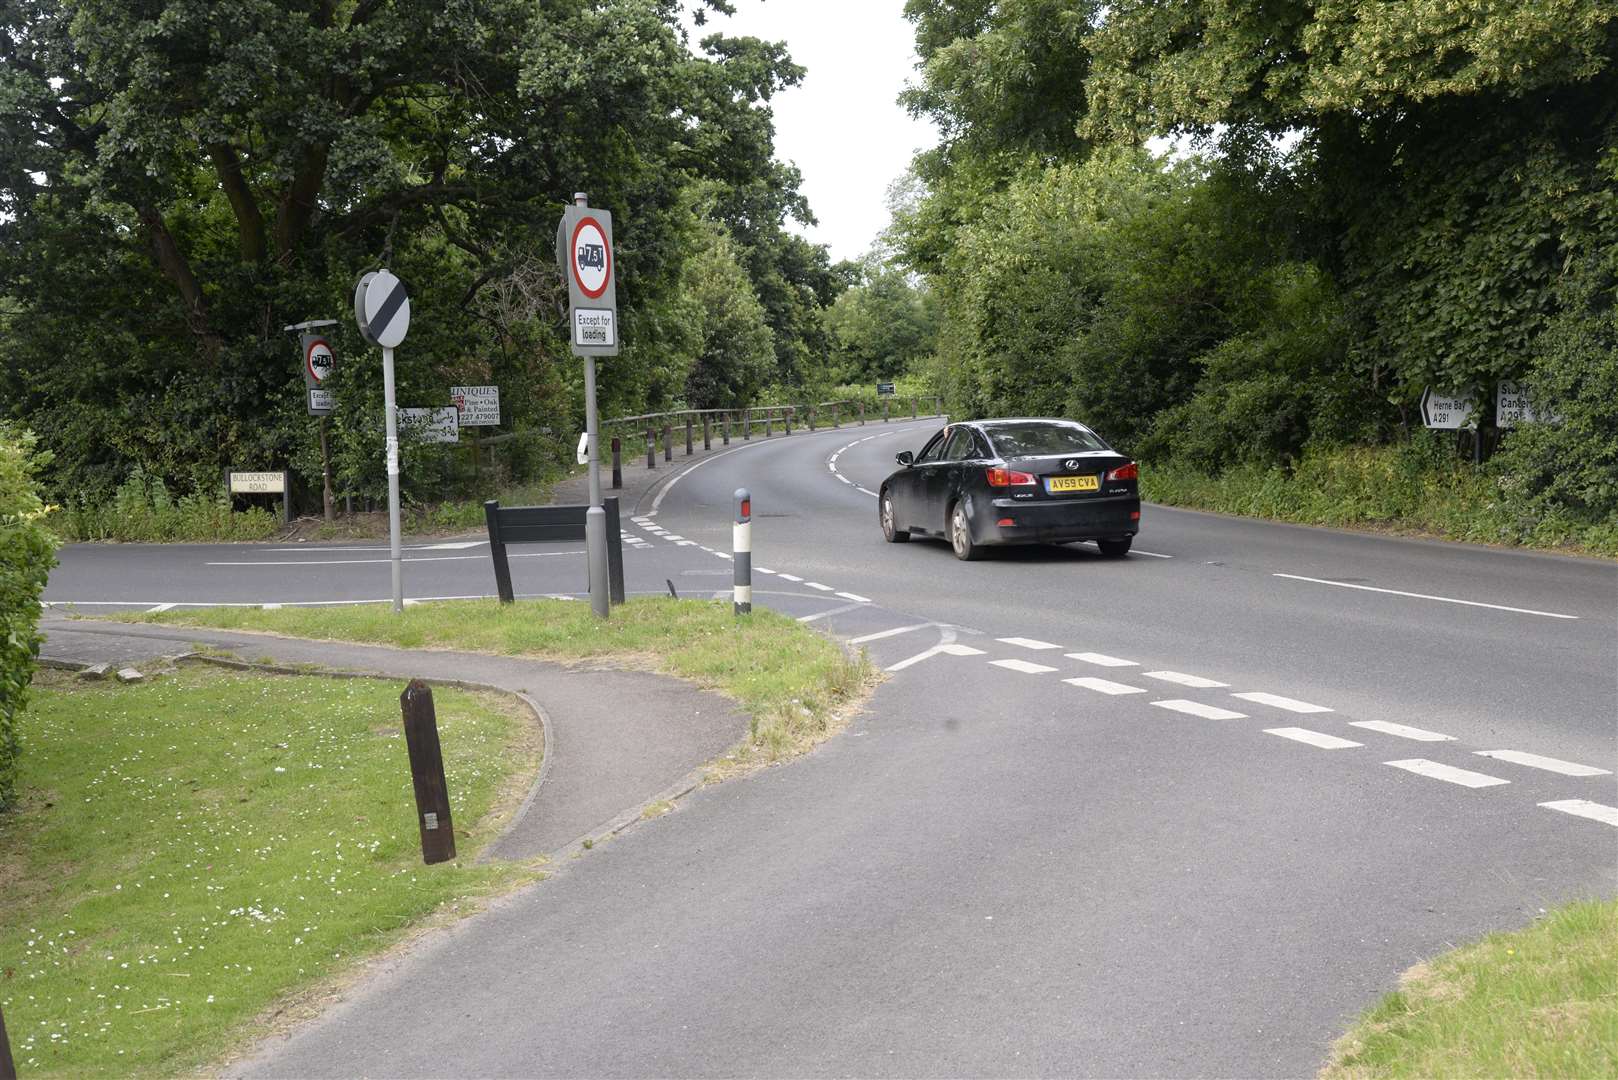 The junction of Bullockstone Road and Canterbury Road in Herne